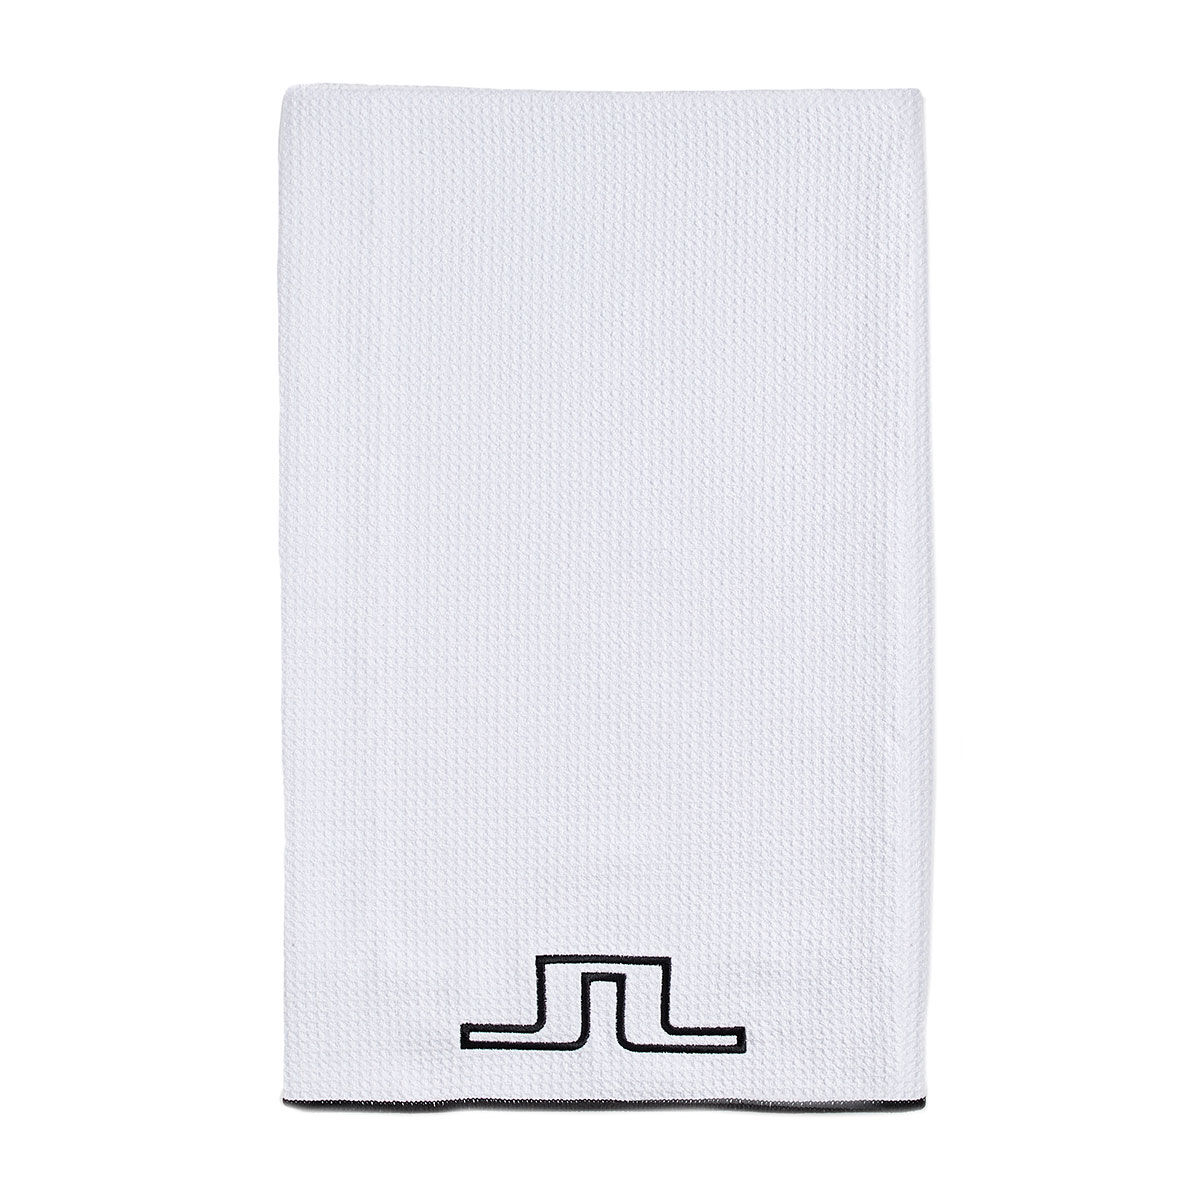 J.Lindeberg White and Black Structured Terry Golf Towel, Size: 105X56Cm| American Golf